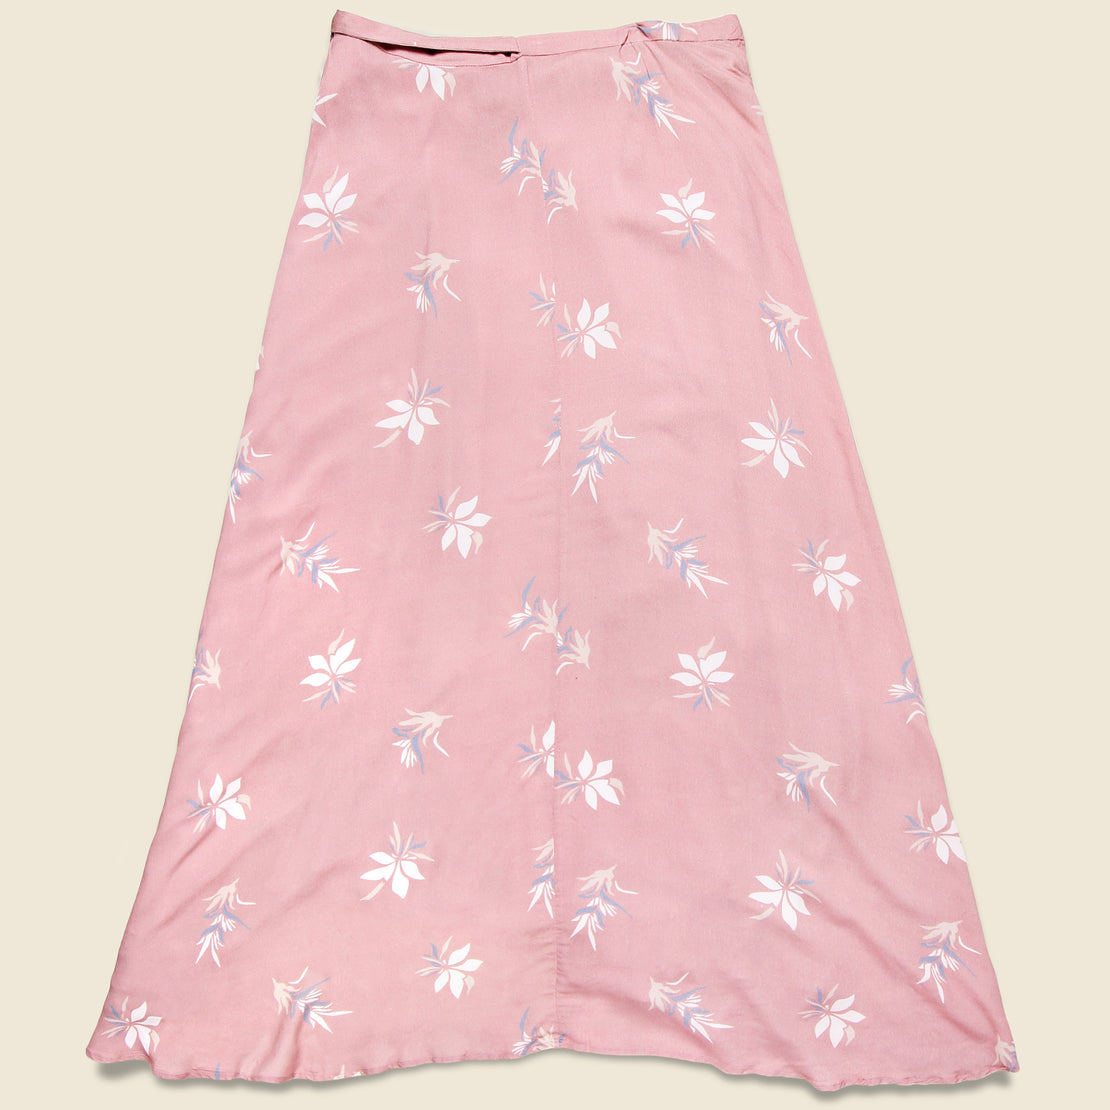 Allegra Wrap Skirt - Lotus Blossom - Faherty - STAG Provisions - W - Onepiece - Skirt